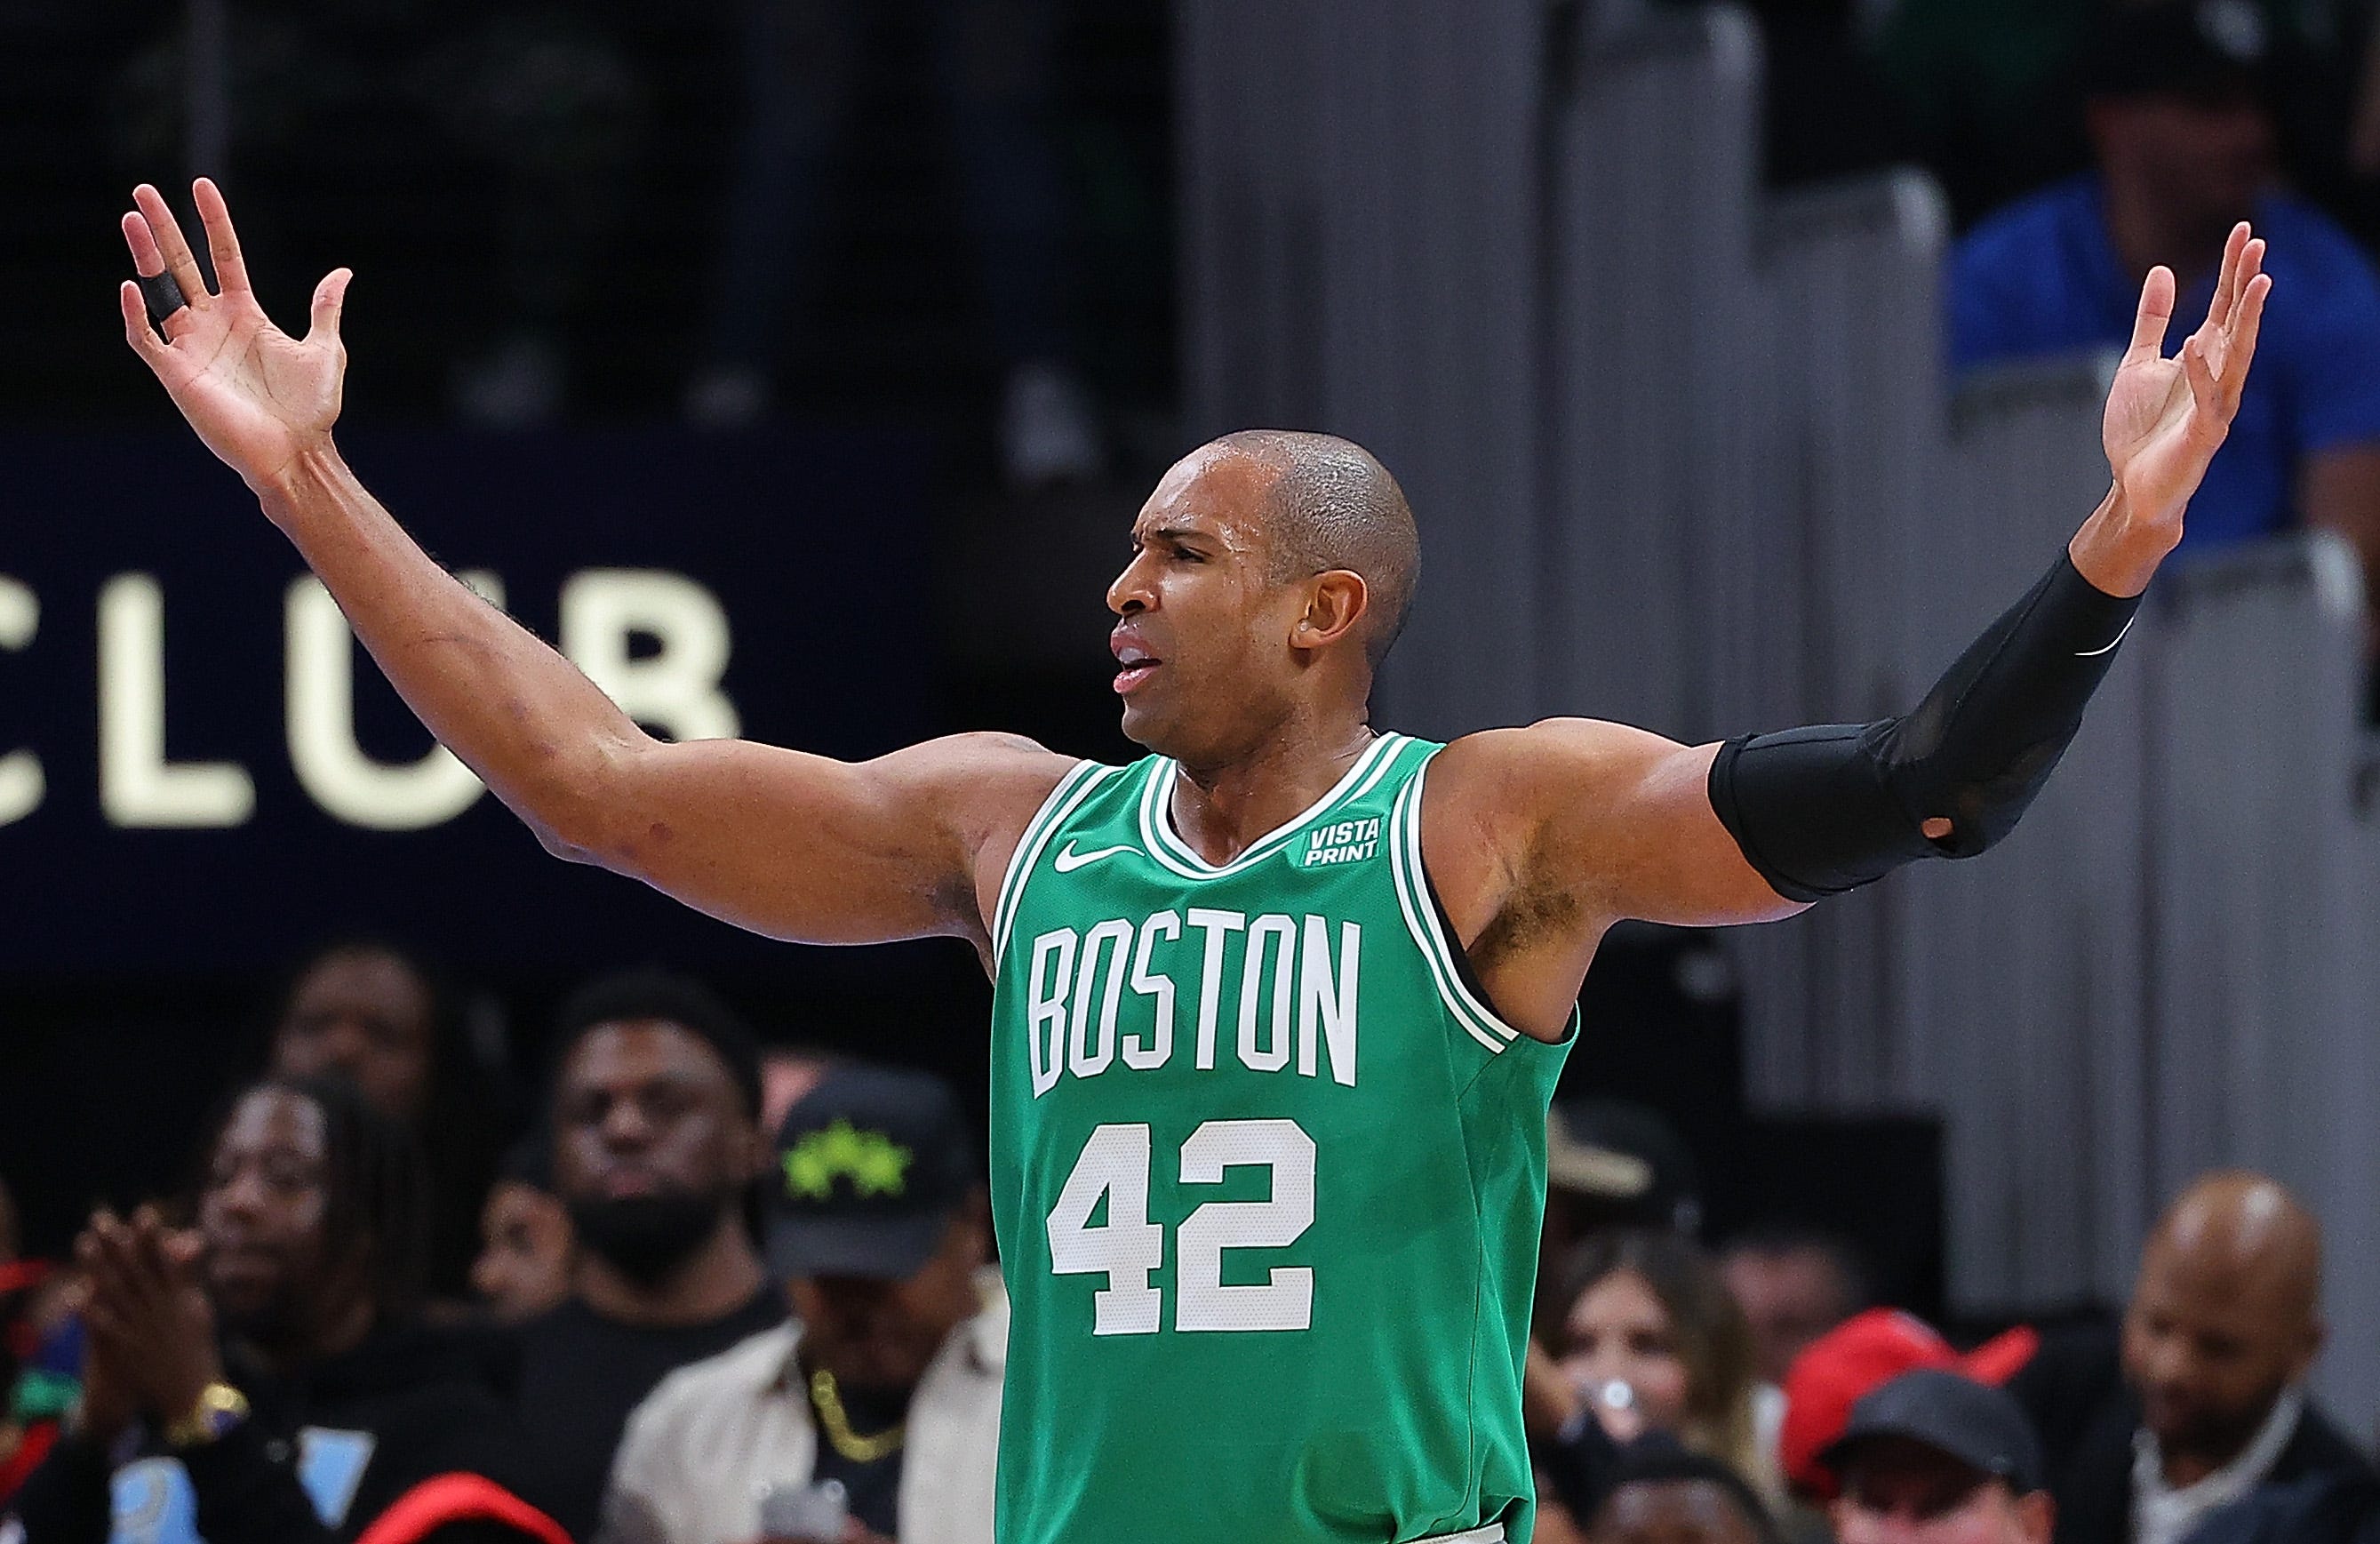 how worried are you about the boston celtics' collapse to the atlanta hawks?